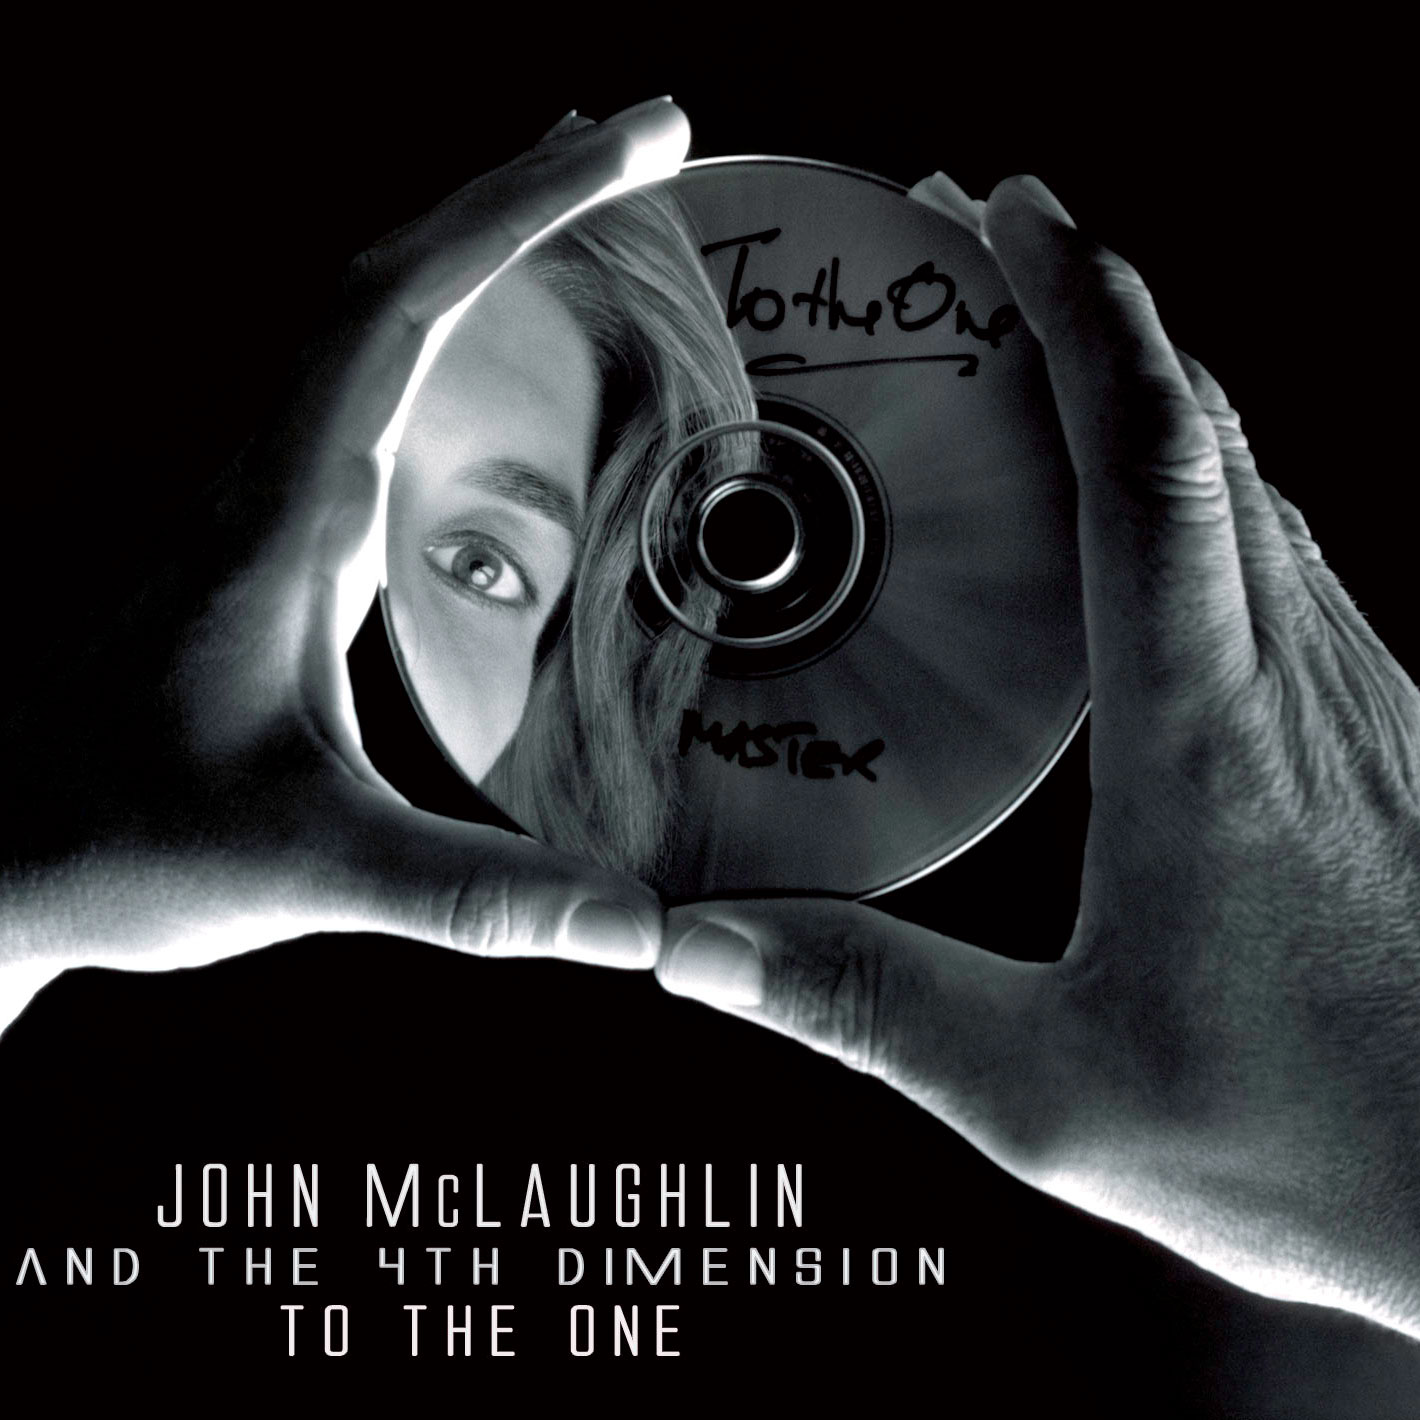 John McLaughlin & The 4th Dimension - To The One (2010)